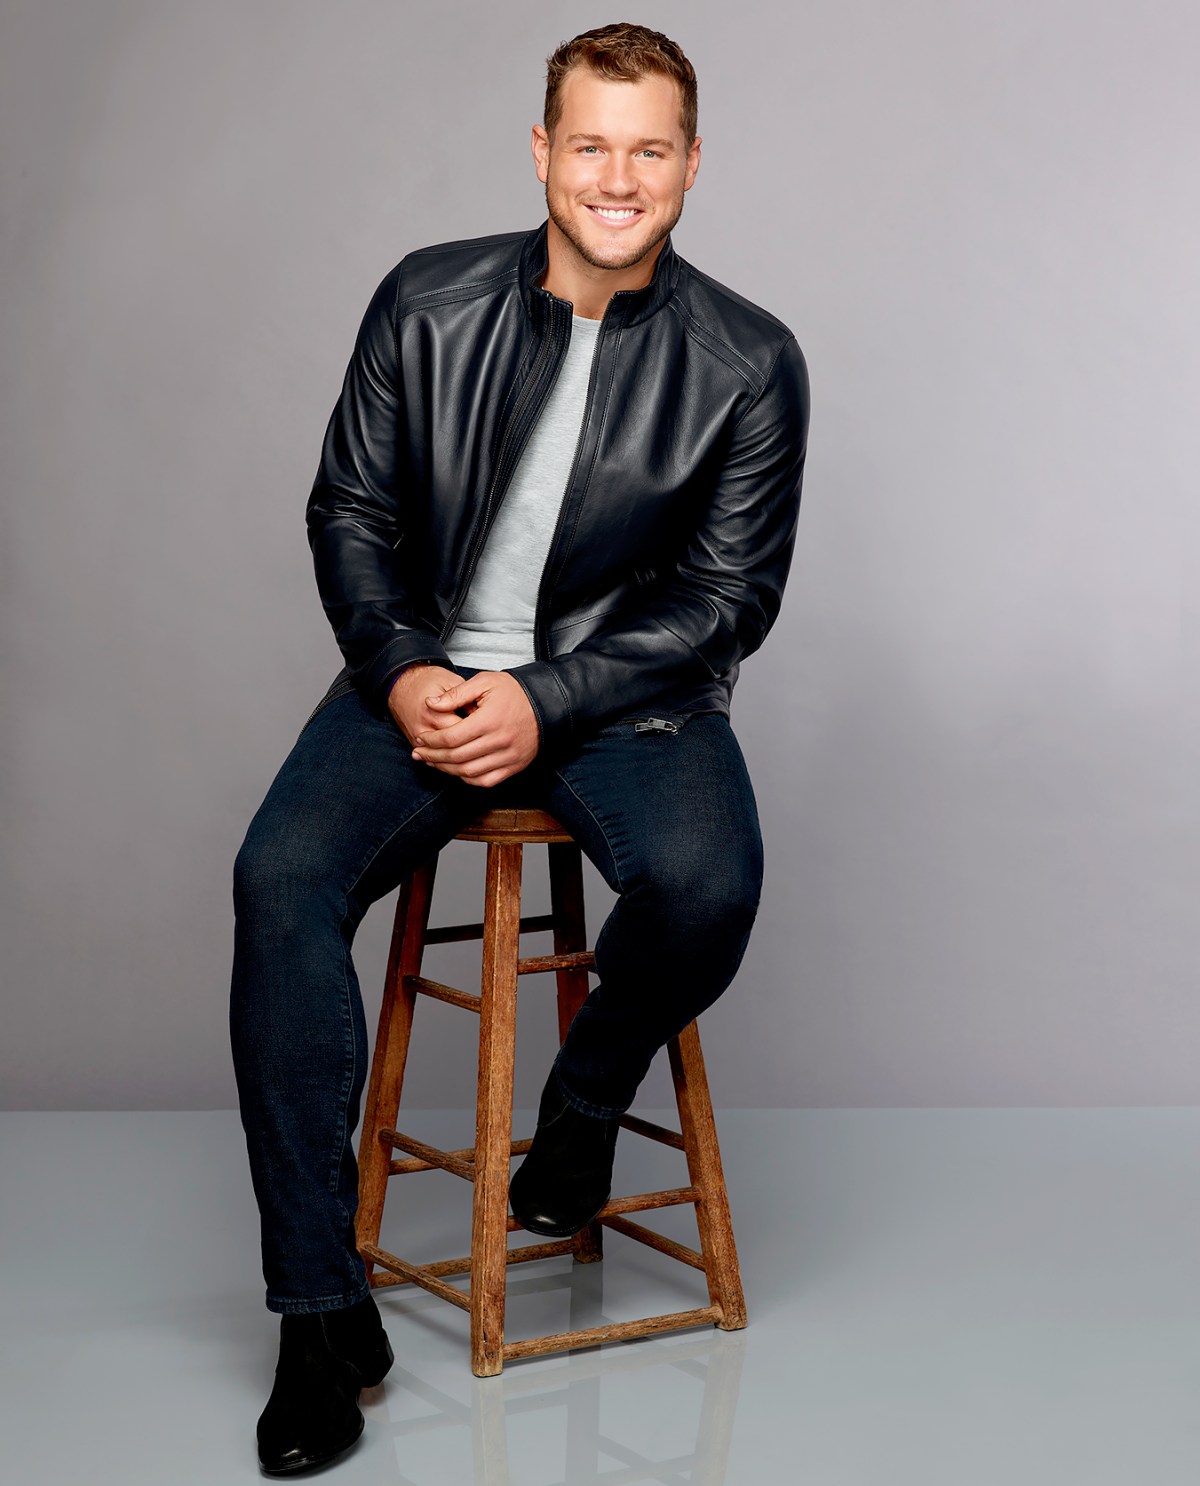 Colton Underwood 10 Hot Pics Ahead of ‘The Bachelor’ Premiere